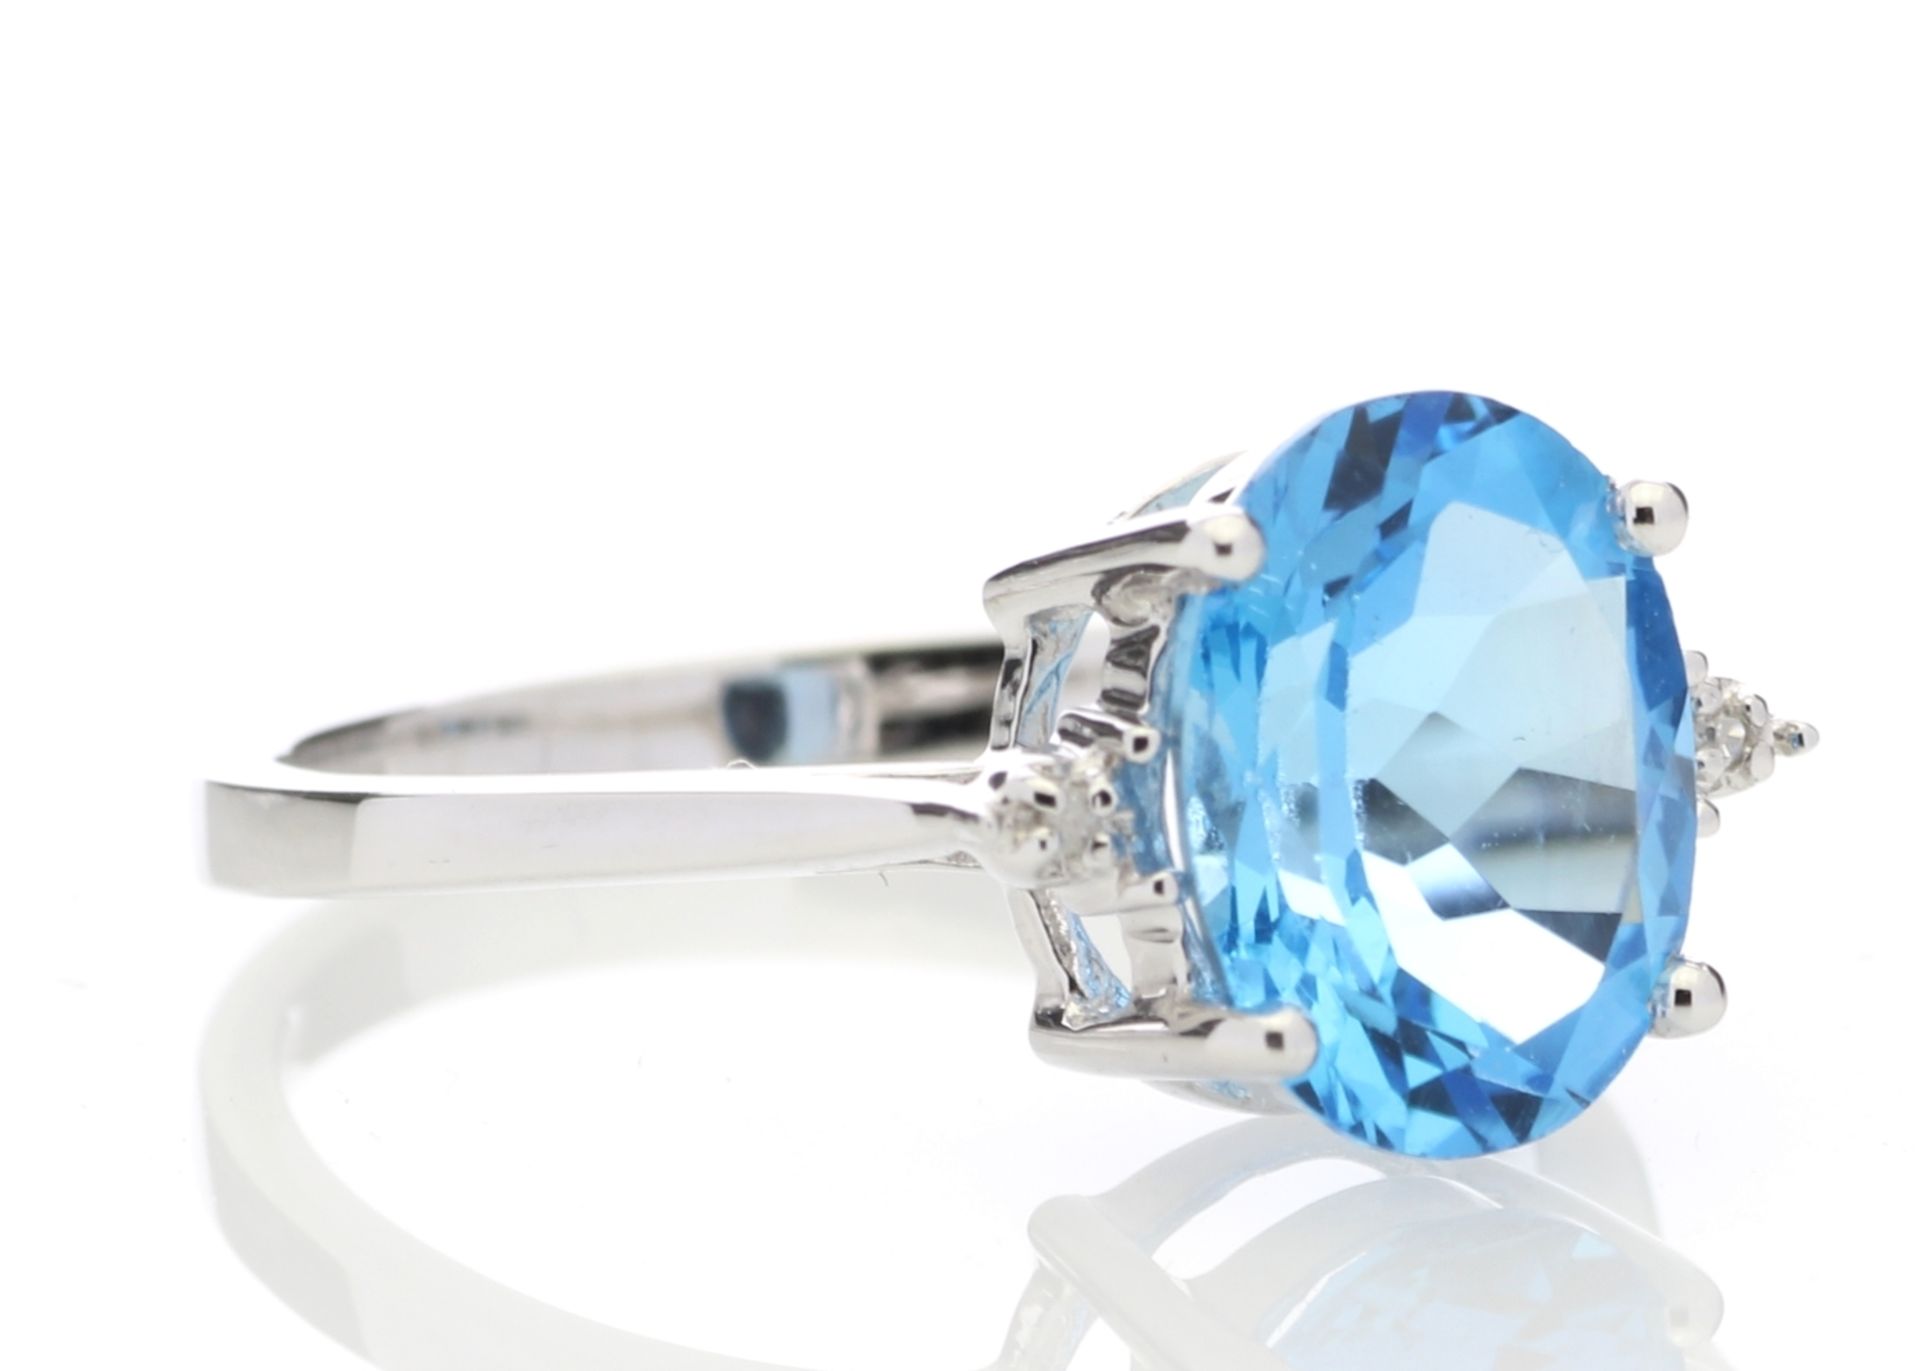 9ct White Gold Diamond And Blue Topaz Ring 0.01 Carats - Valued by GIE £1,370.00 - 9ct White Gold - Image 4 of 6